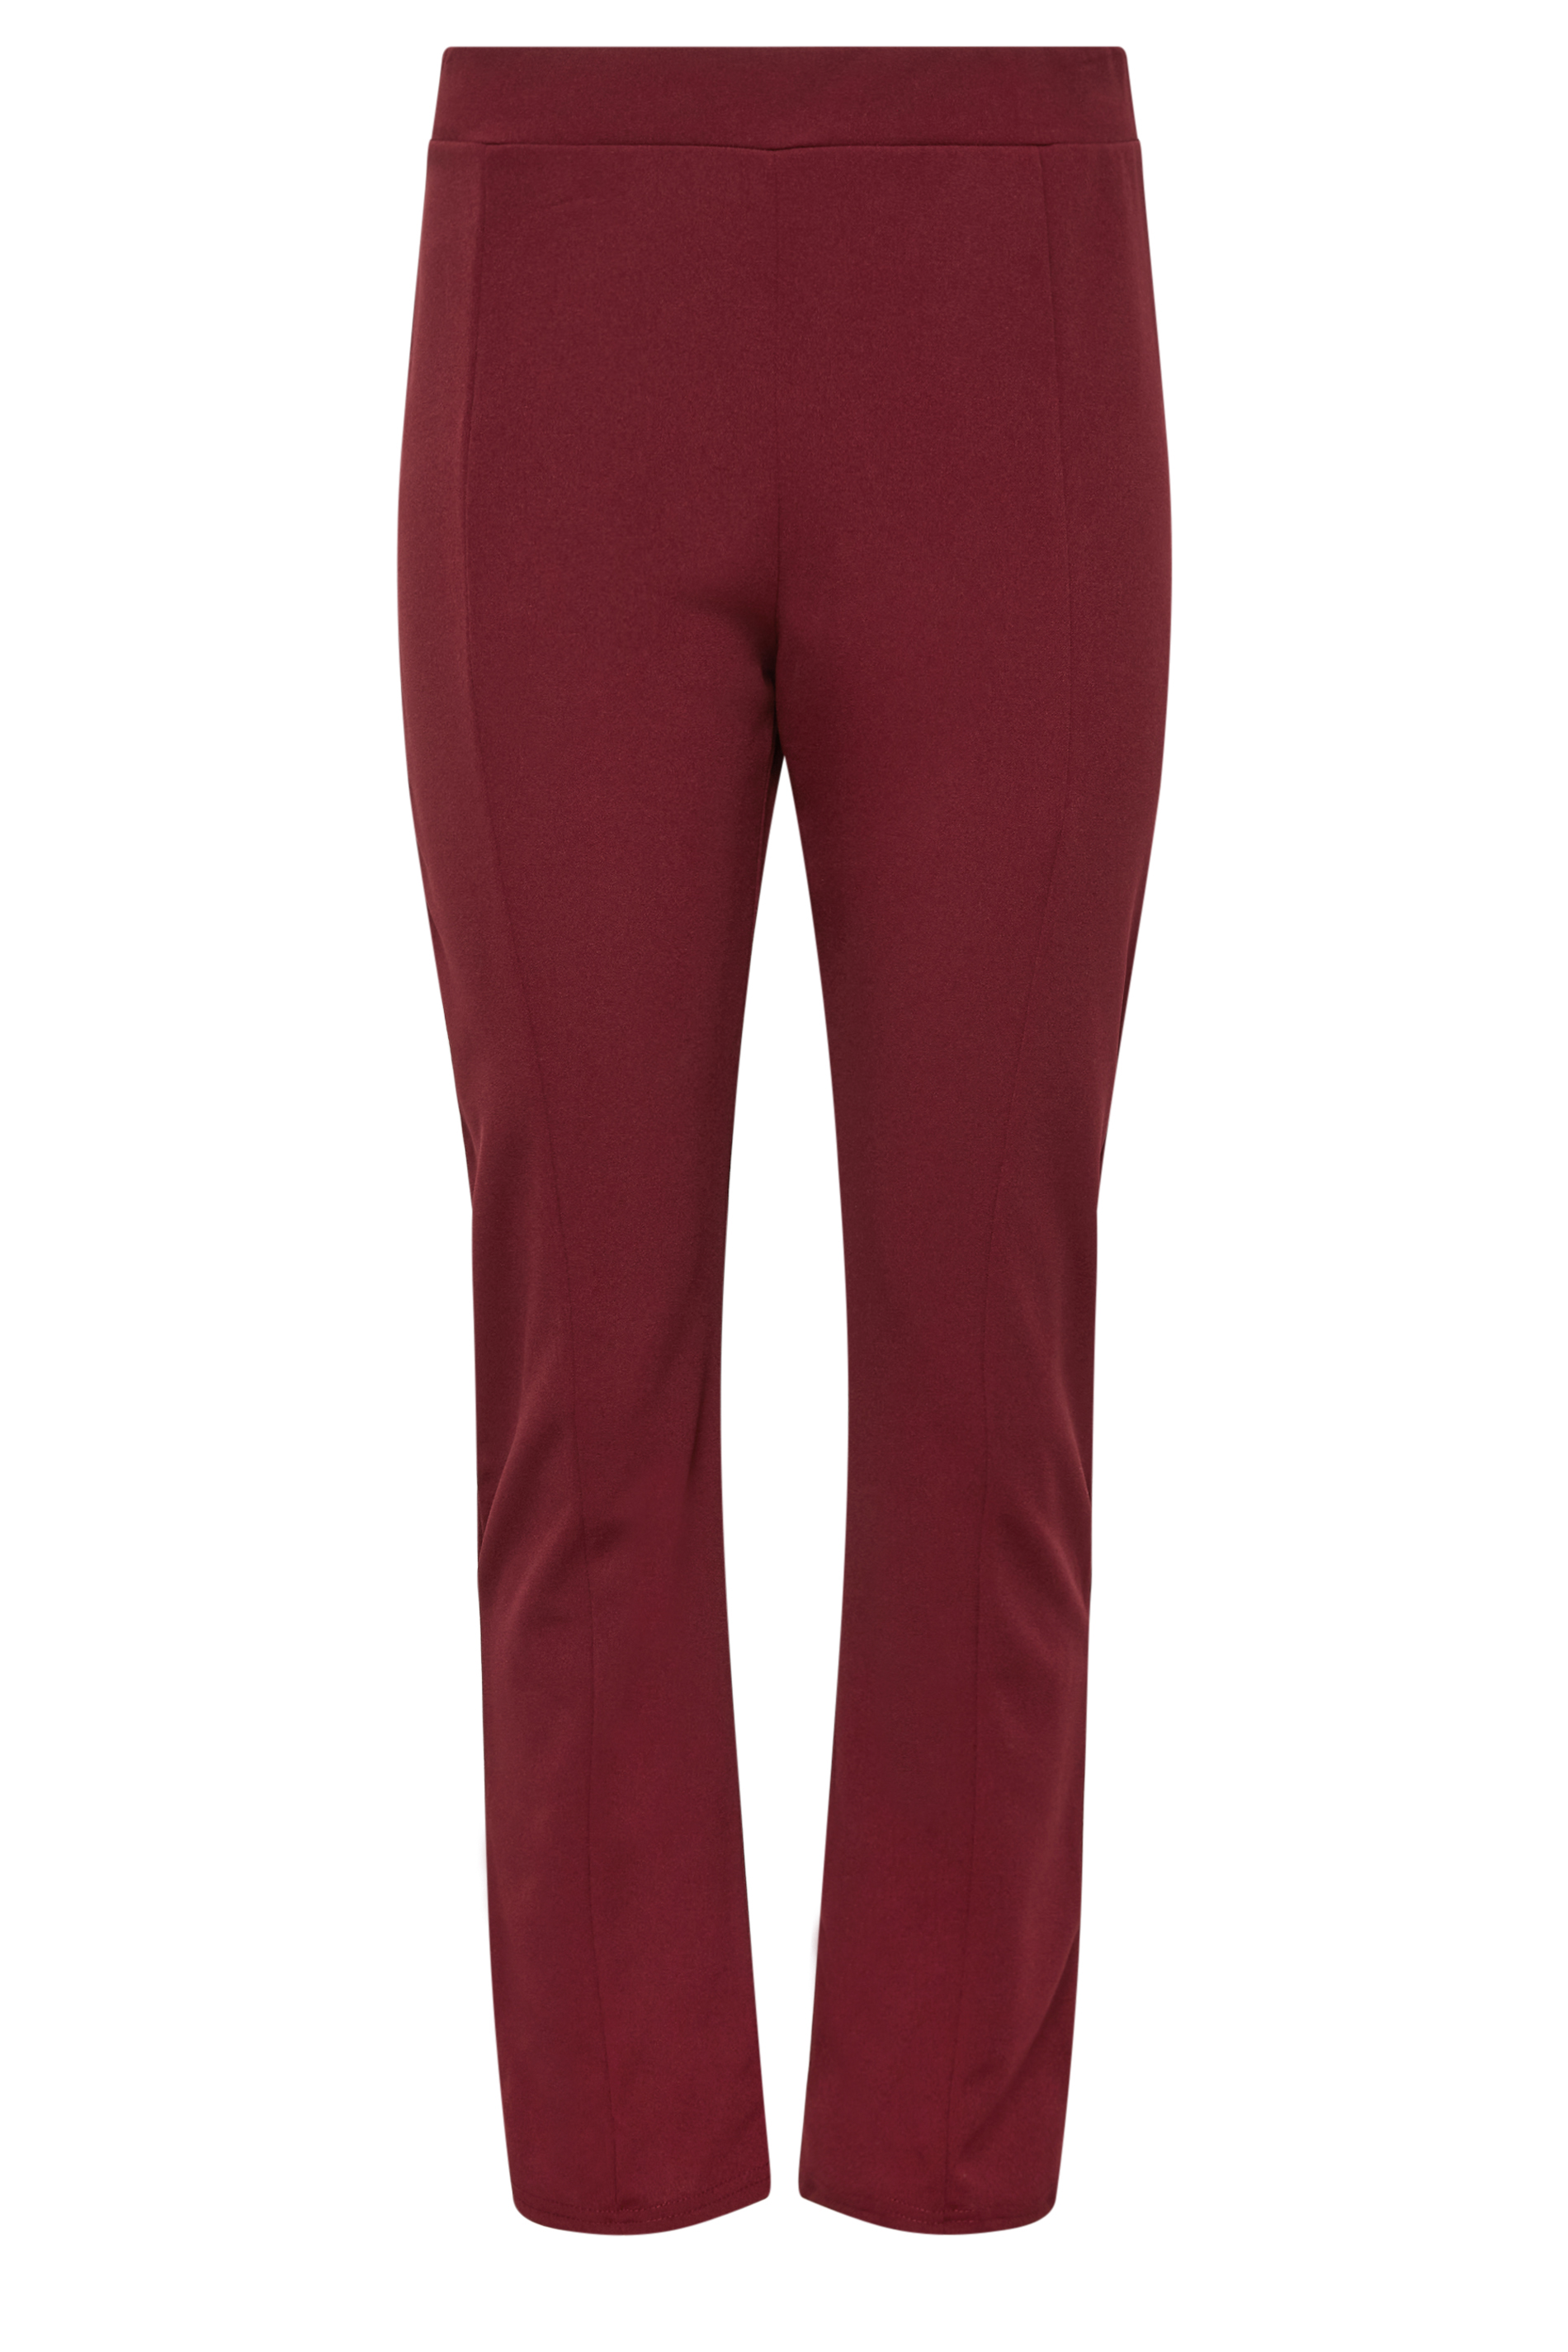 Yours Split Front Trouser  Red  verycouk